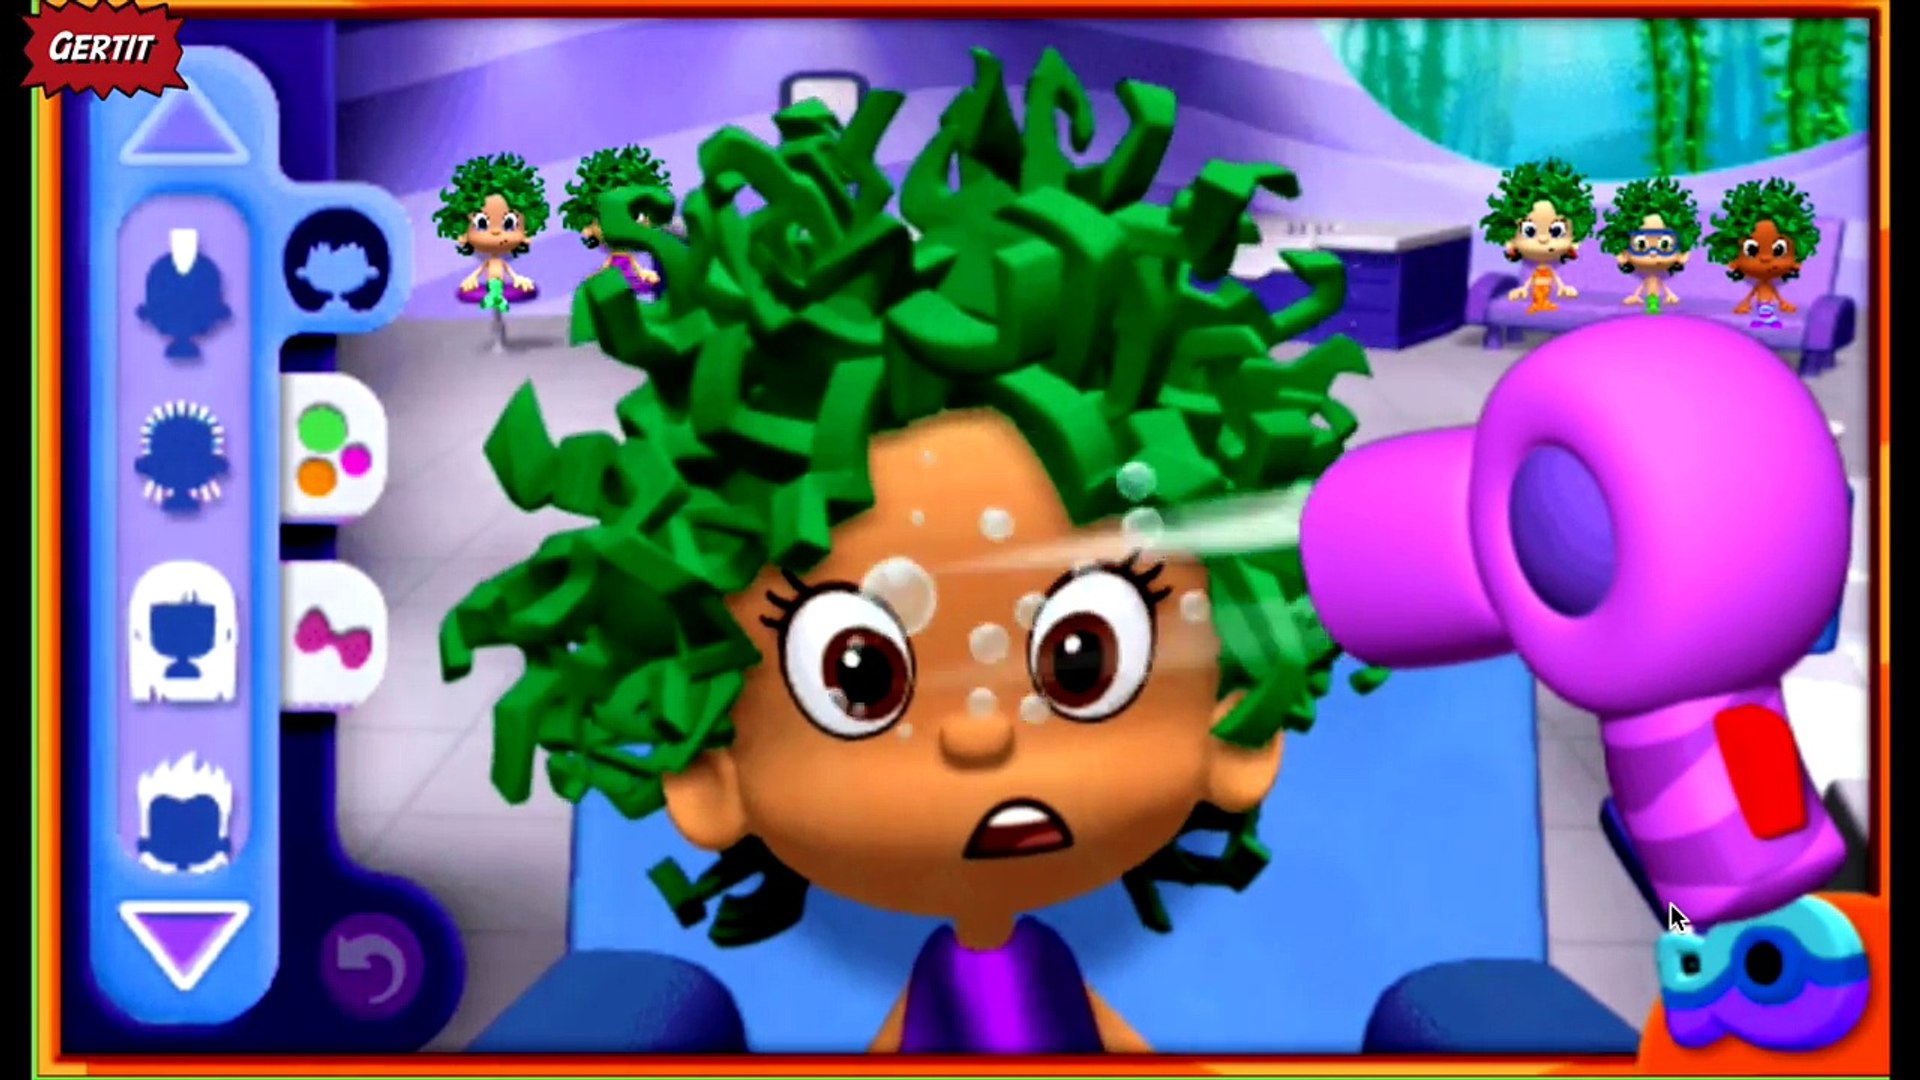 Bubble Guppies: Good Hair Day for Kids - Haircut Full English Game For Kids  Nick Jr. By GERTIT – Видео Dailymotion